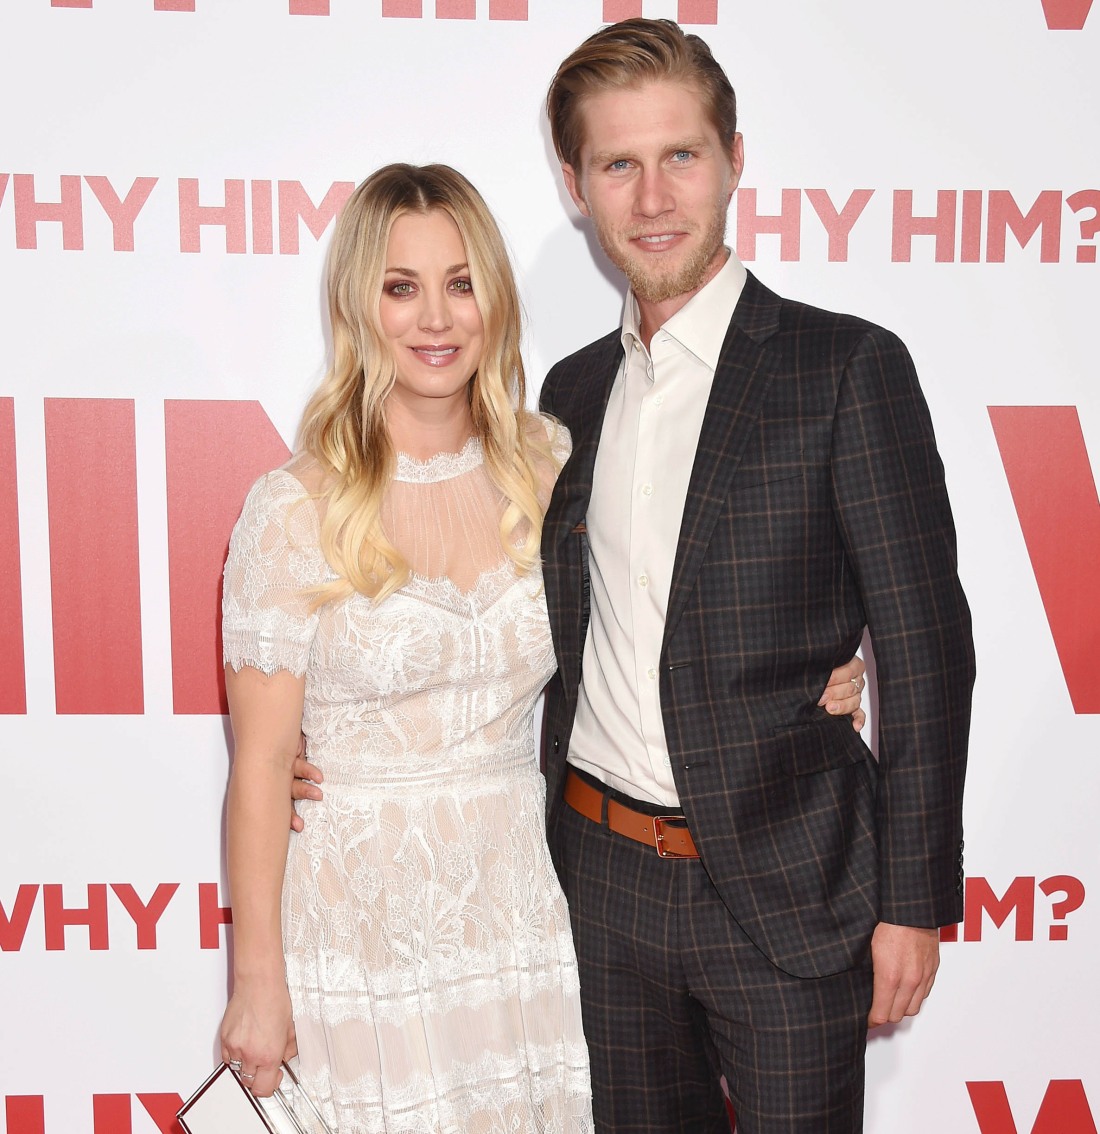 Premiere Of 20th Century Fox's 'Why Him?' - Arrivals